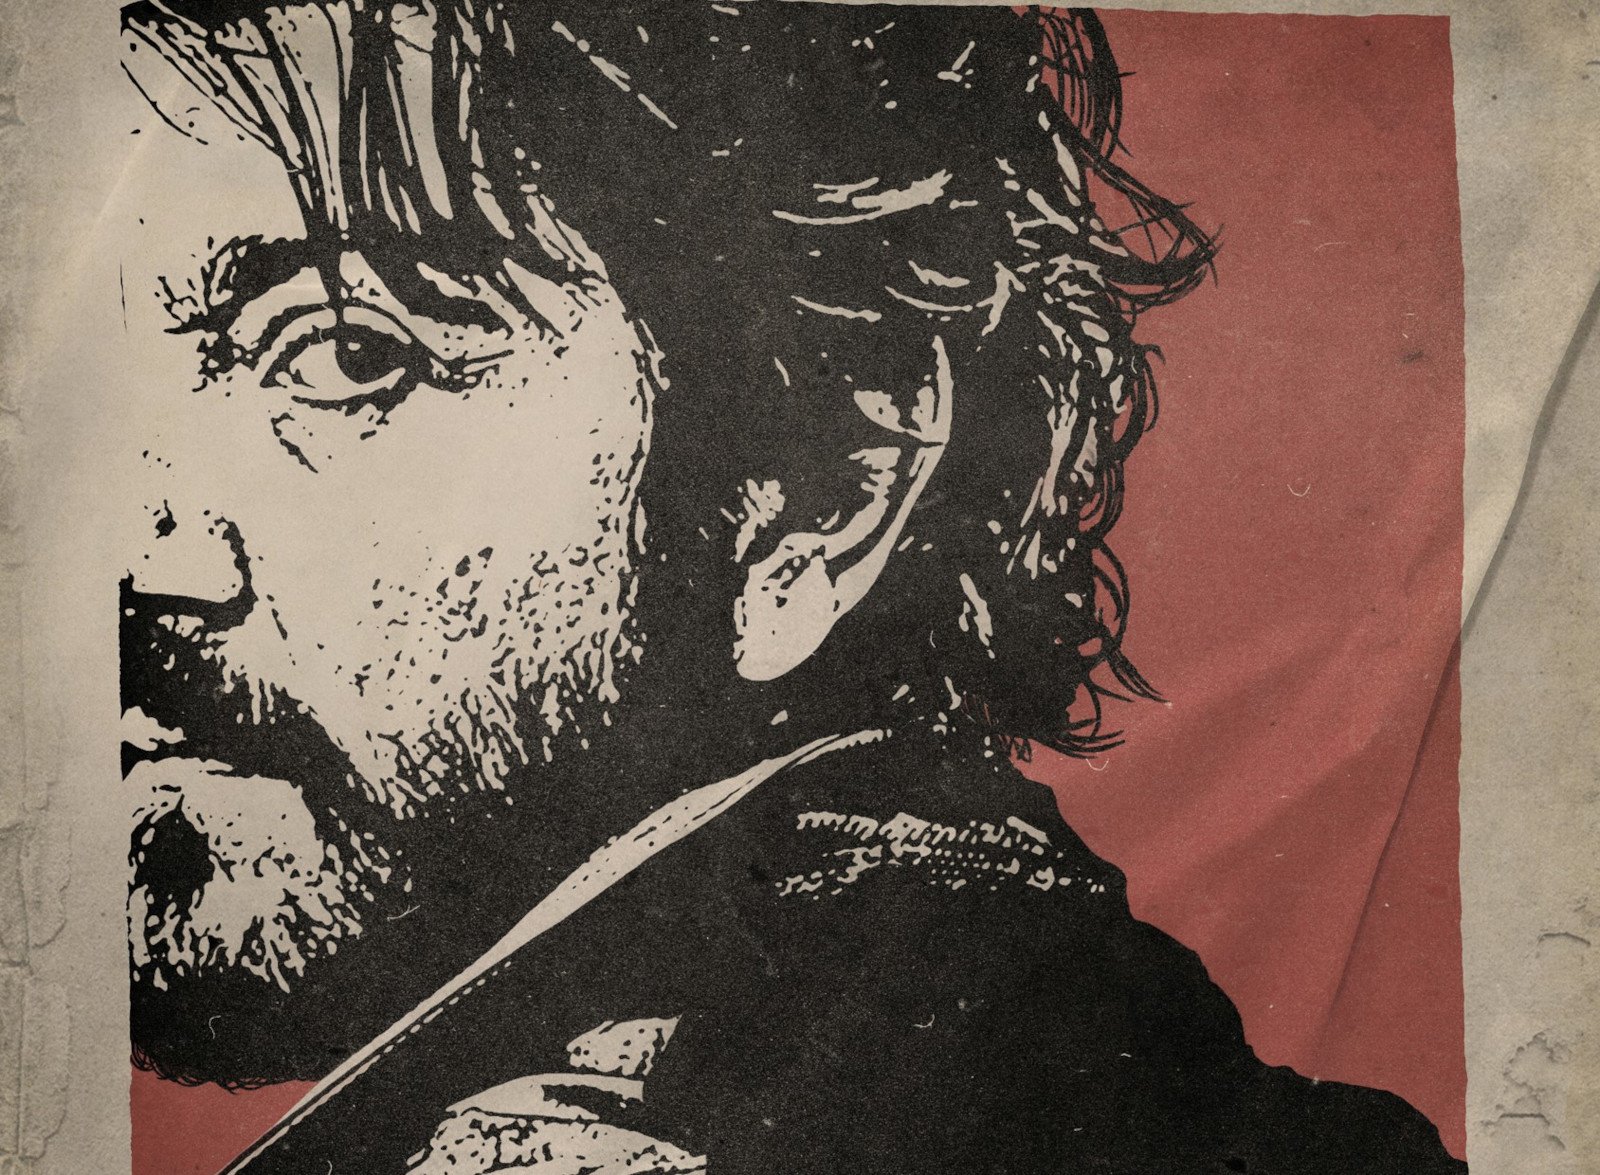 Key art of Diego Luna as Cassian Andor for our article about 'Andor' Episode 5 on Disney+. It's a black and white image of him against a red and white background.